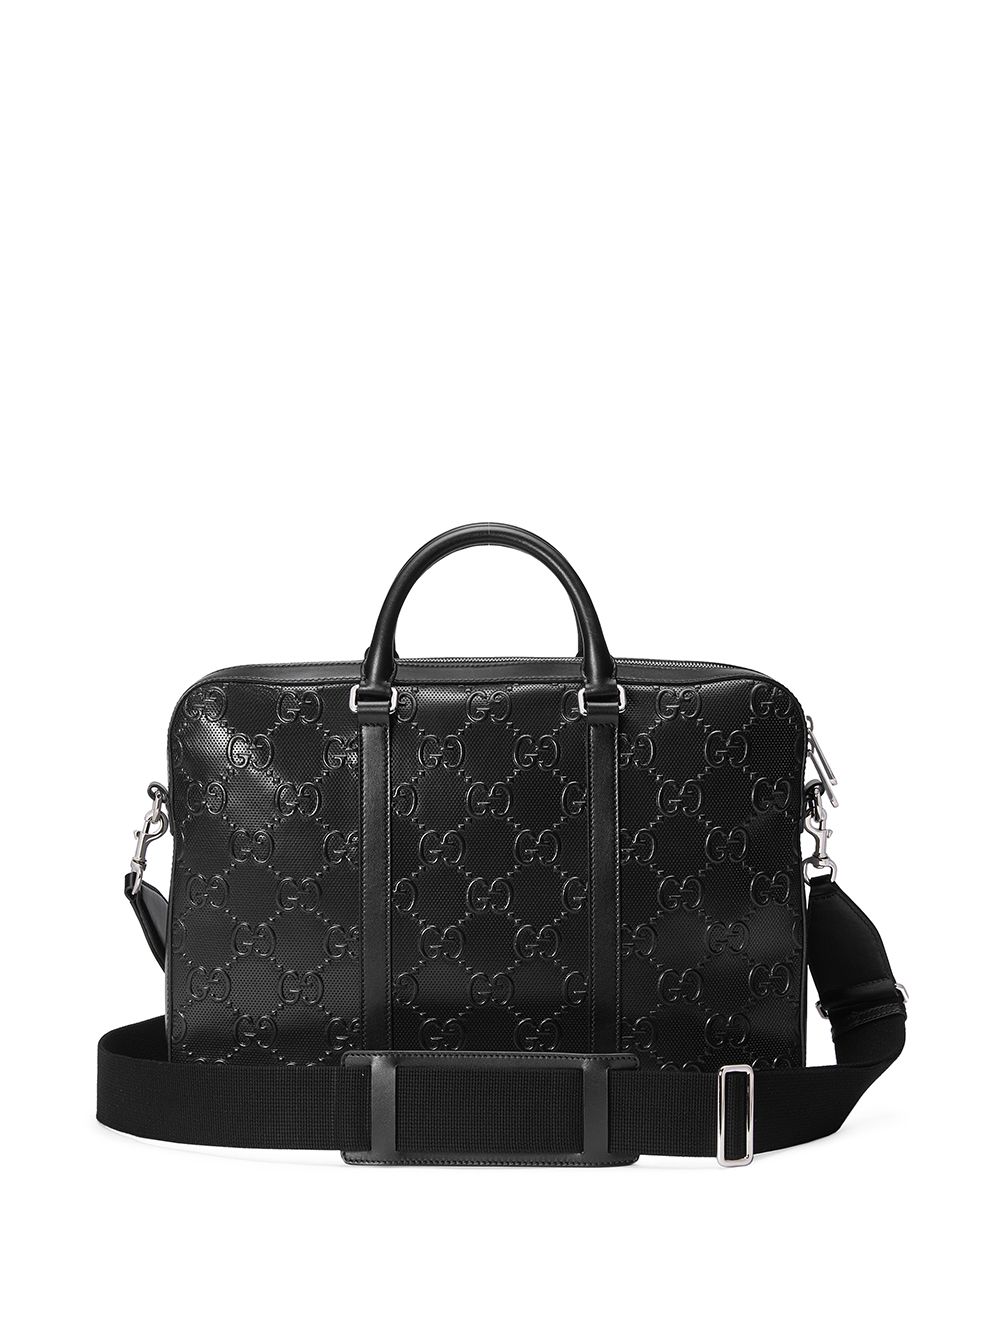 Gucci GG embossed briefcase bag